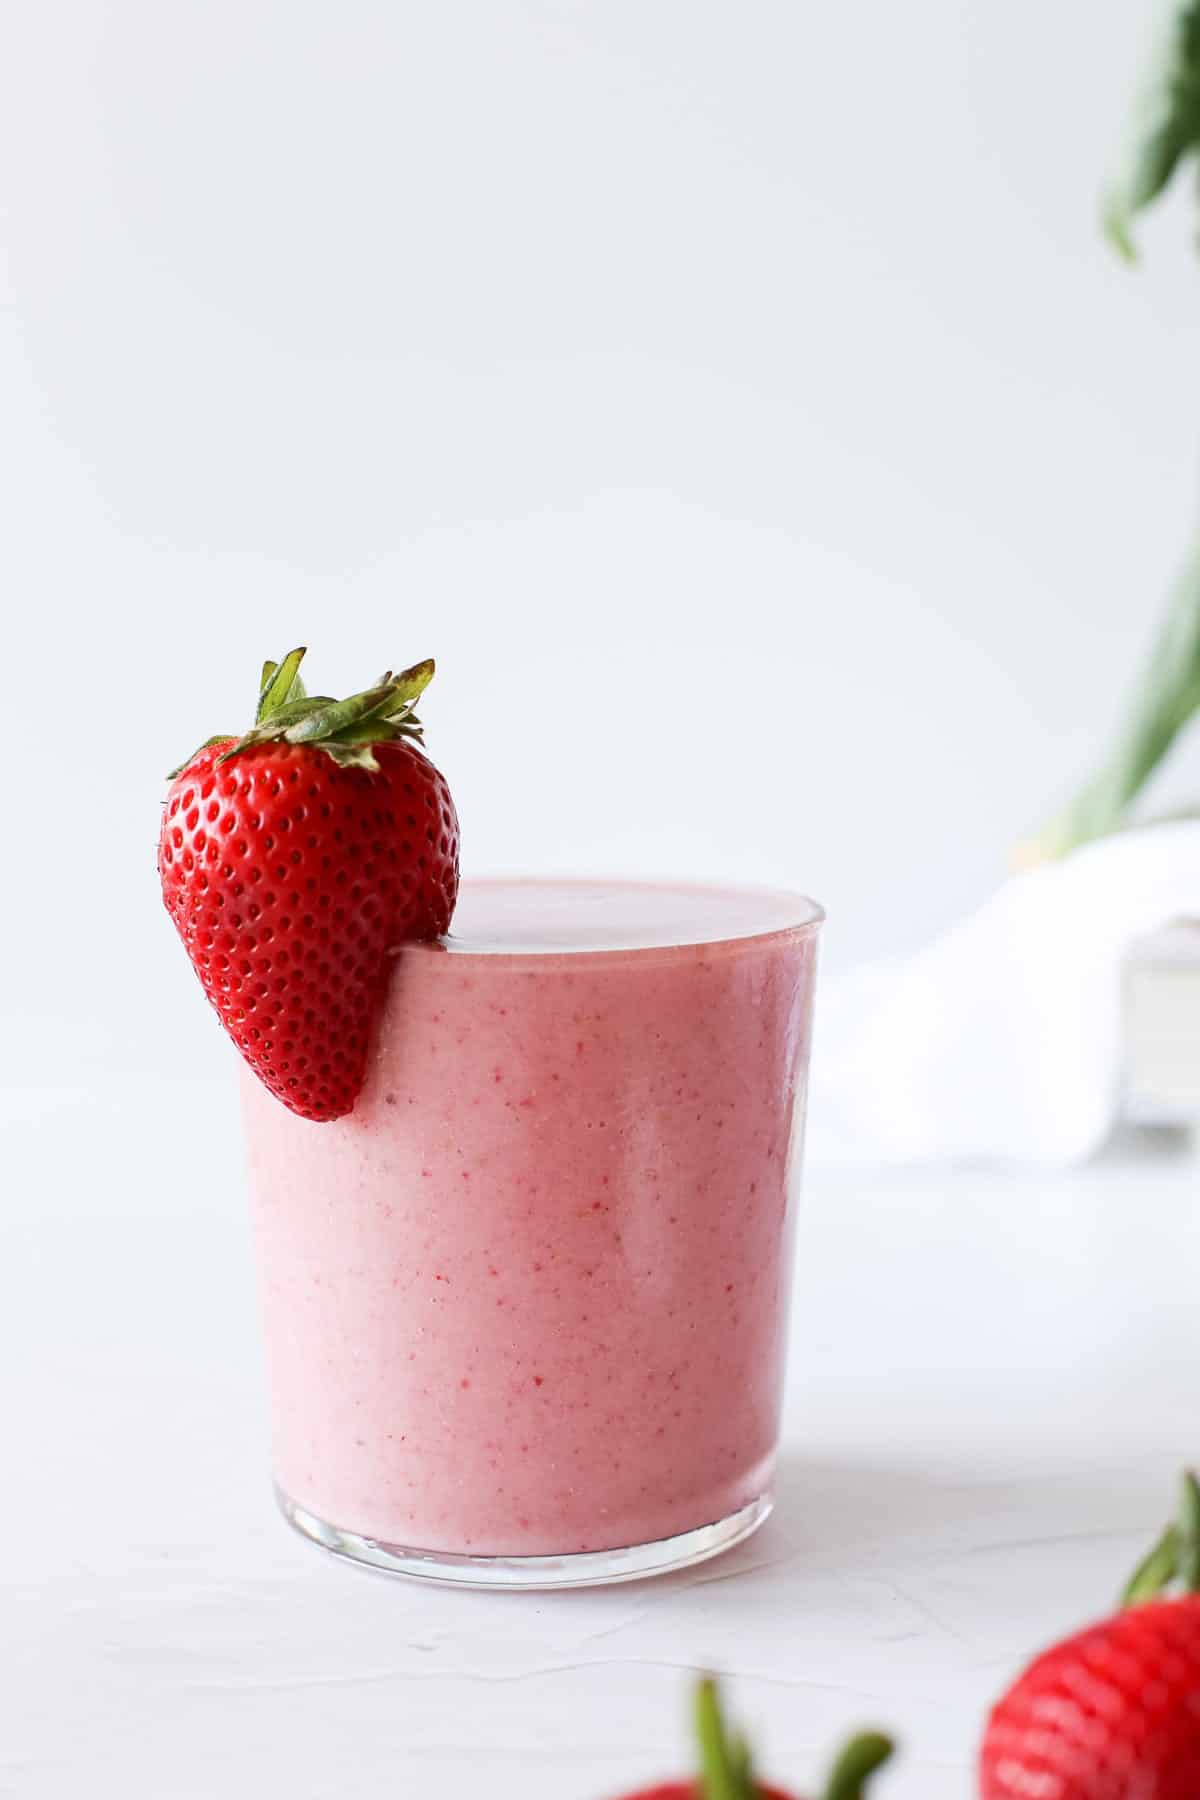 A glass of strawberry banana smoothie with a whole fresh strawberry on the rim.